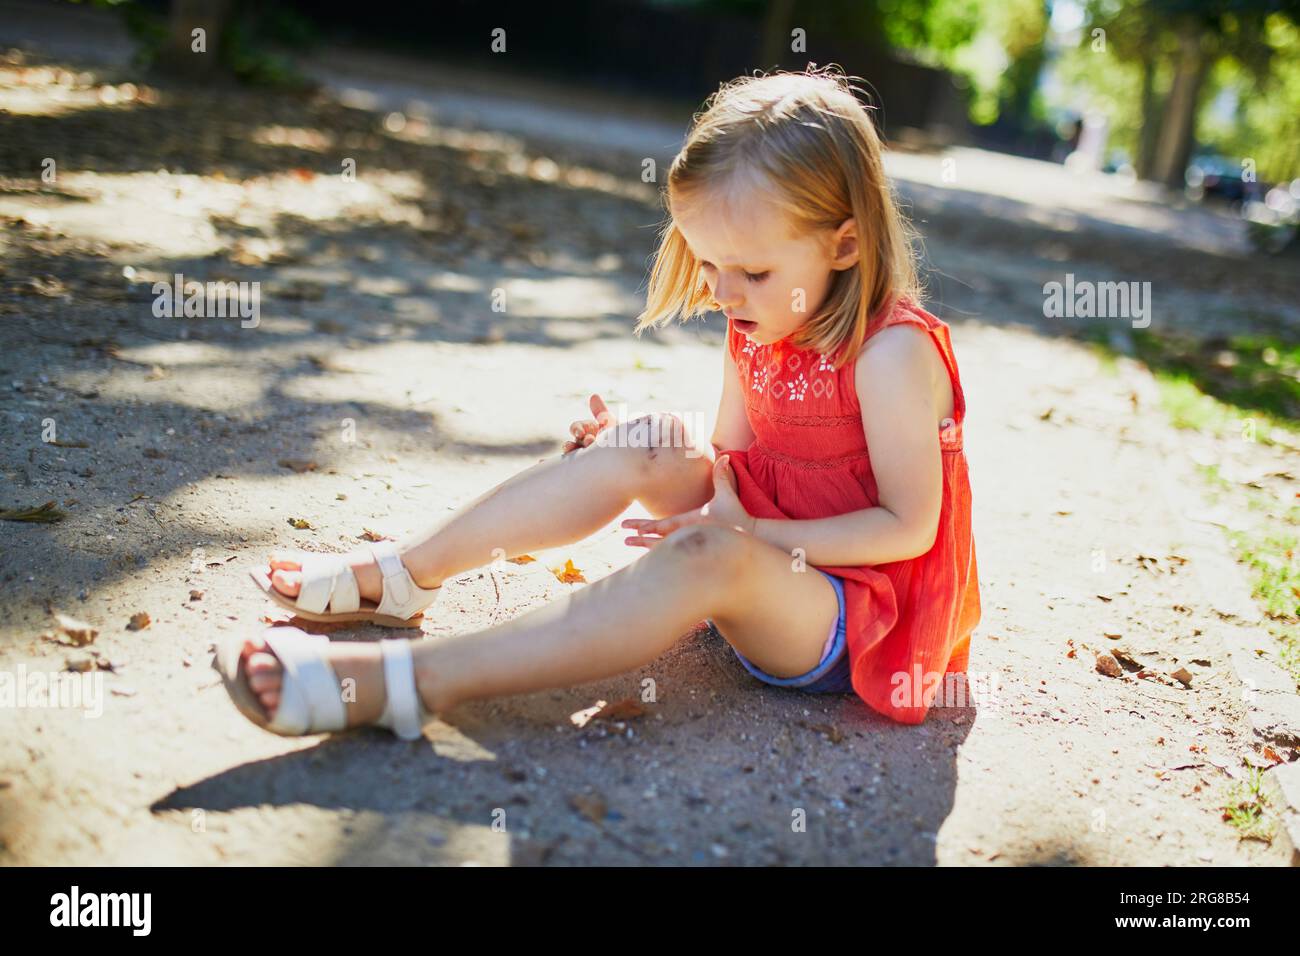 Cute little girl sitting on the ground after falling down. Child getting hurt while walking in park. Kid looking at her boo-boo Stock Photo